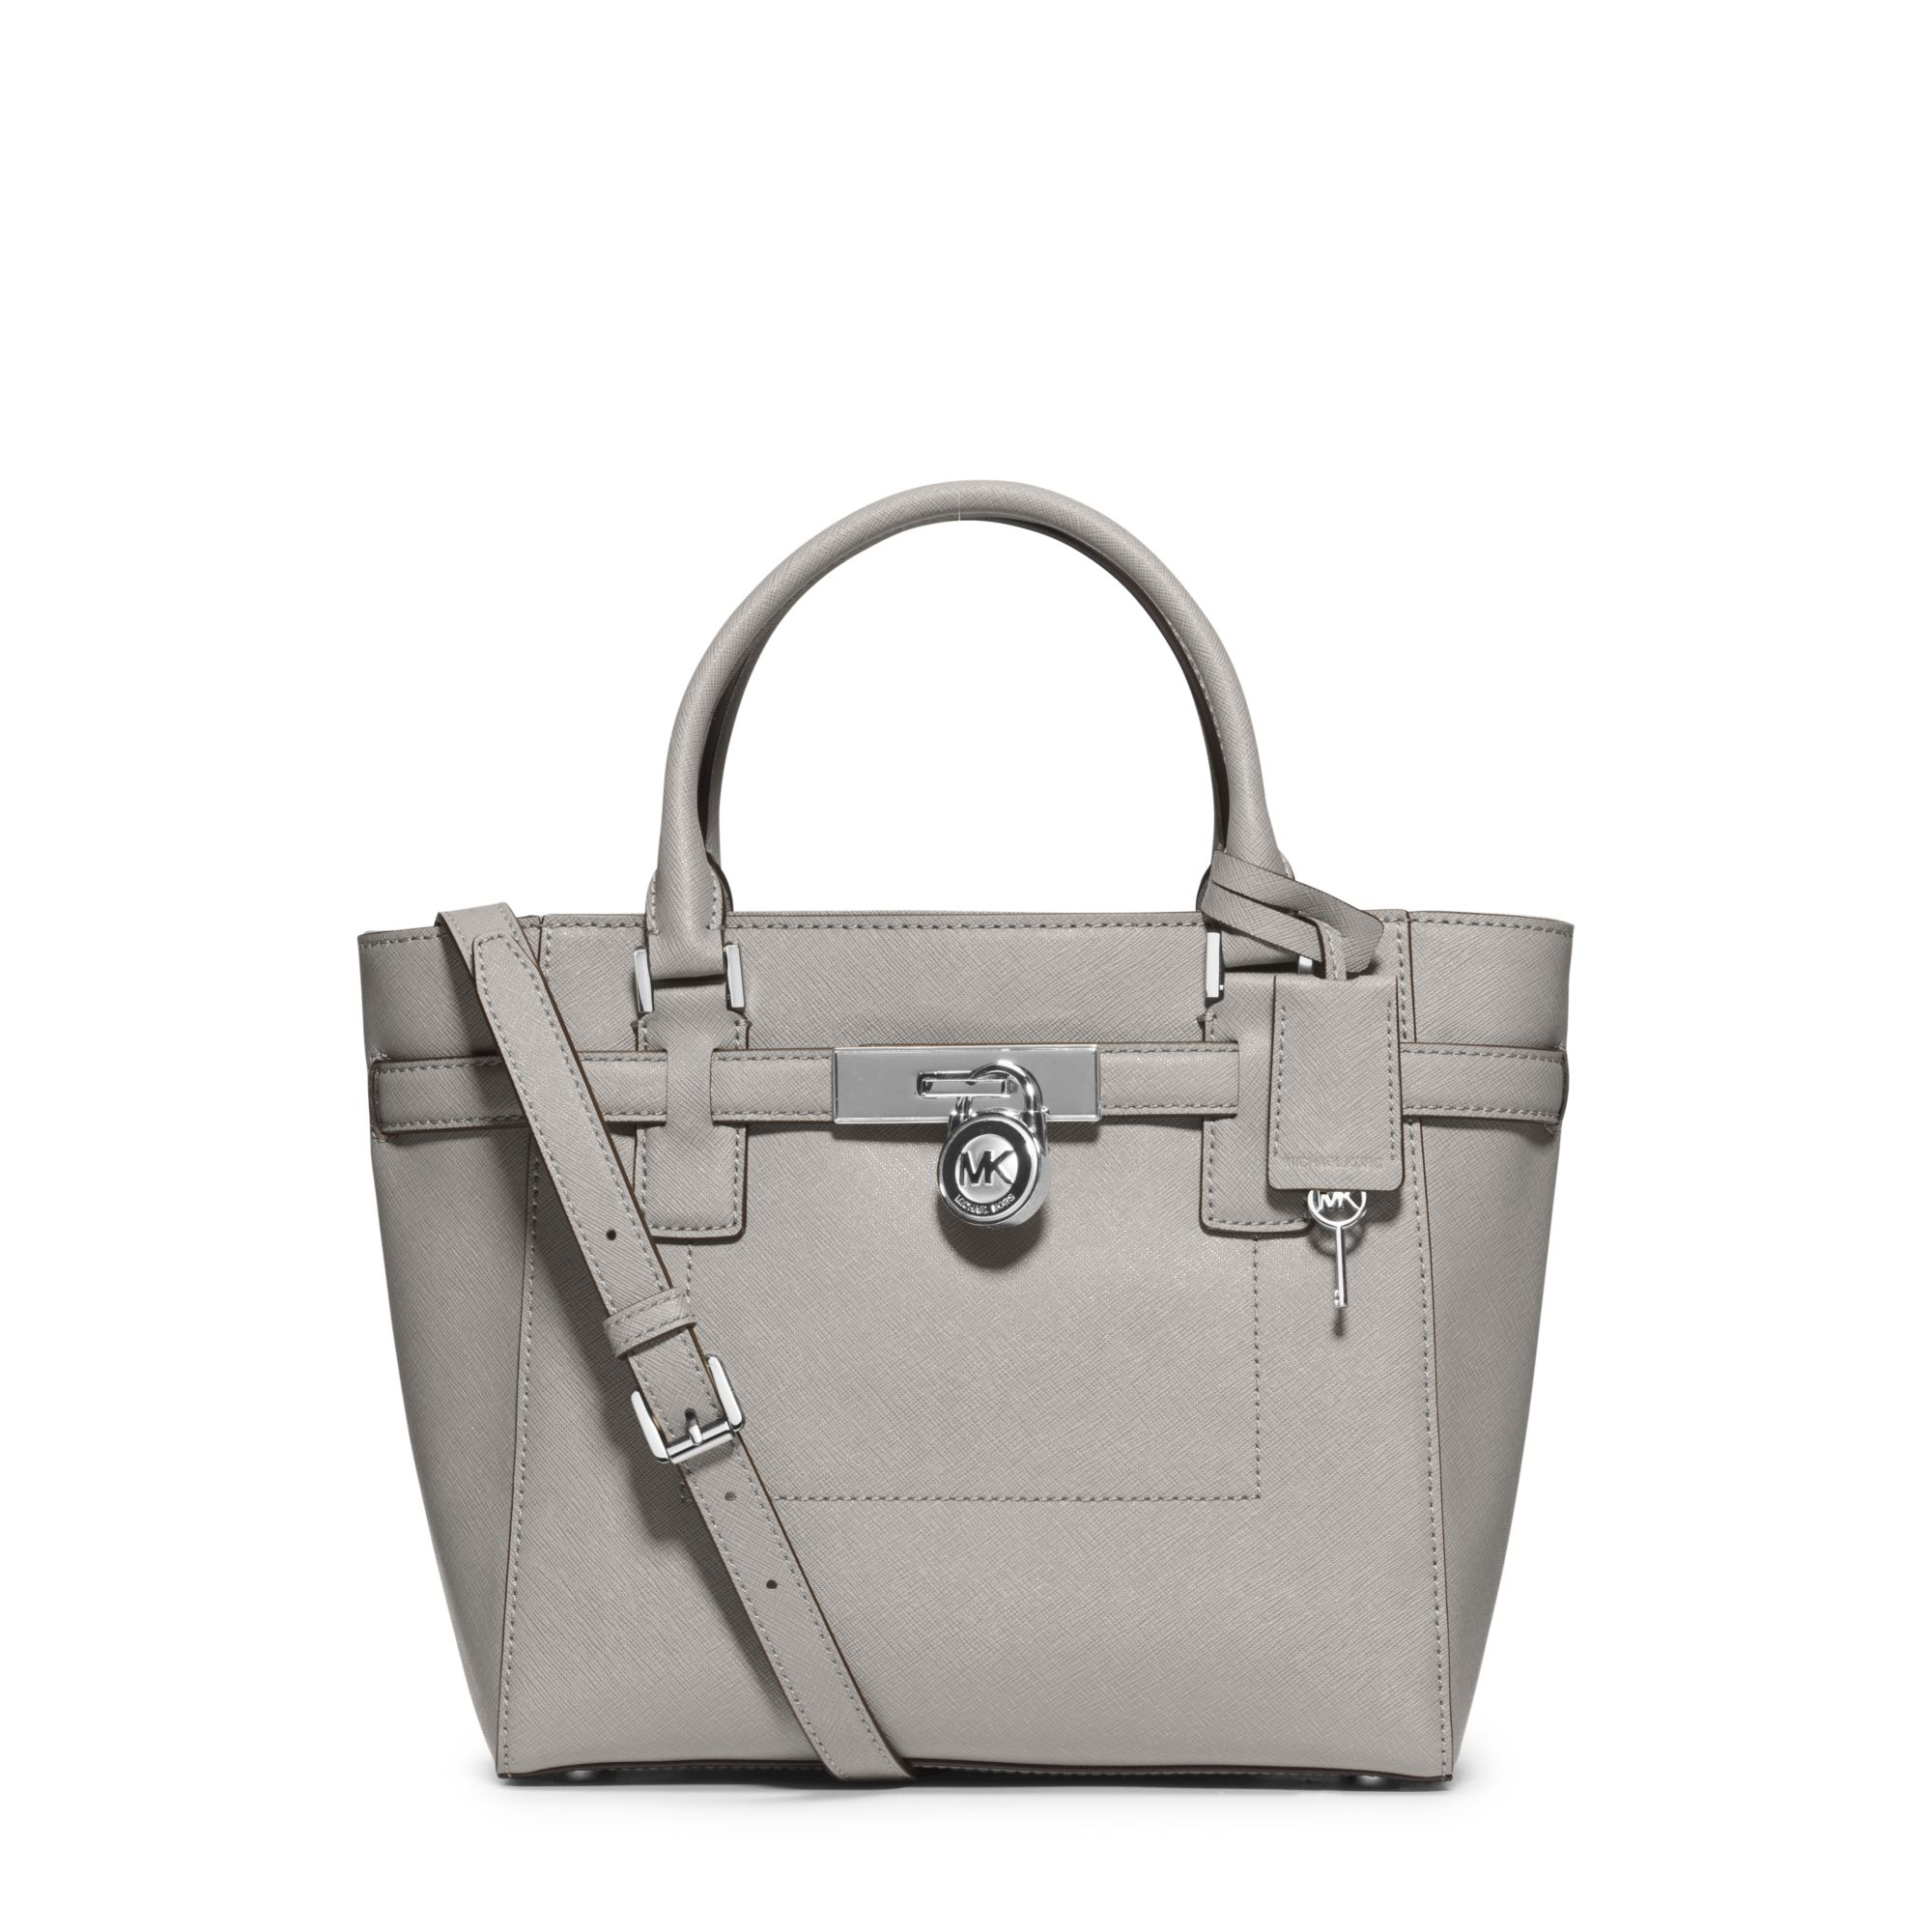 Voyager Small Saffiano Leather Tote Bag | Michael Kors